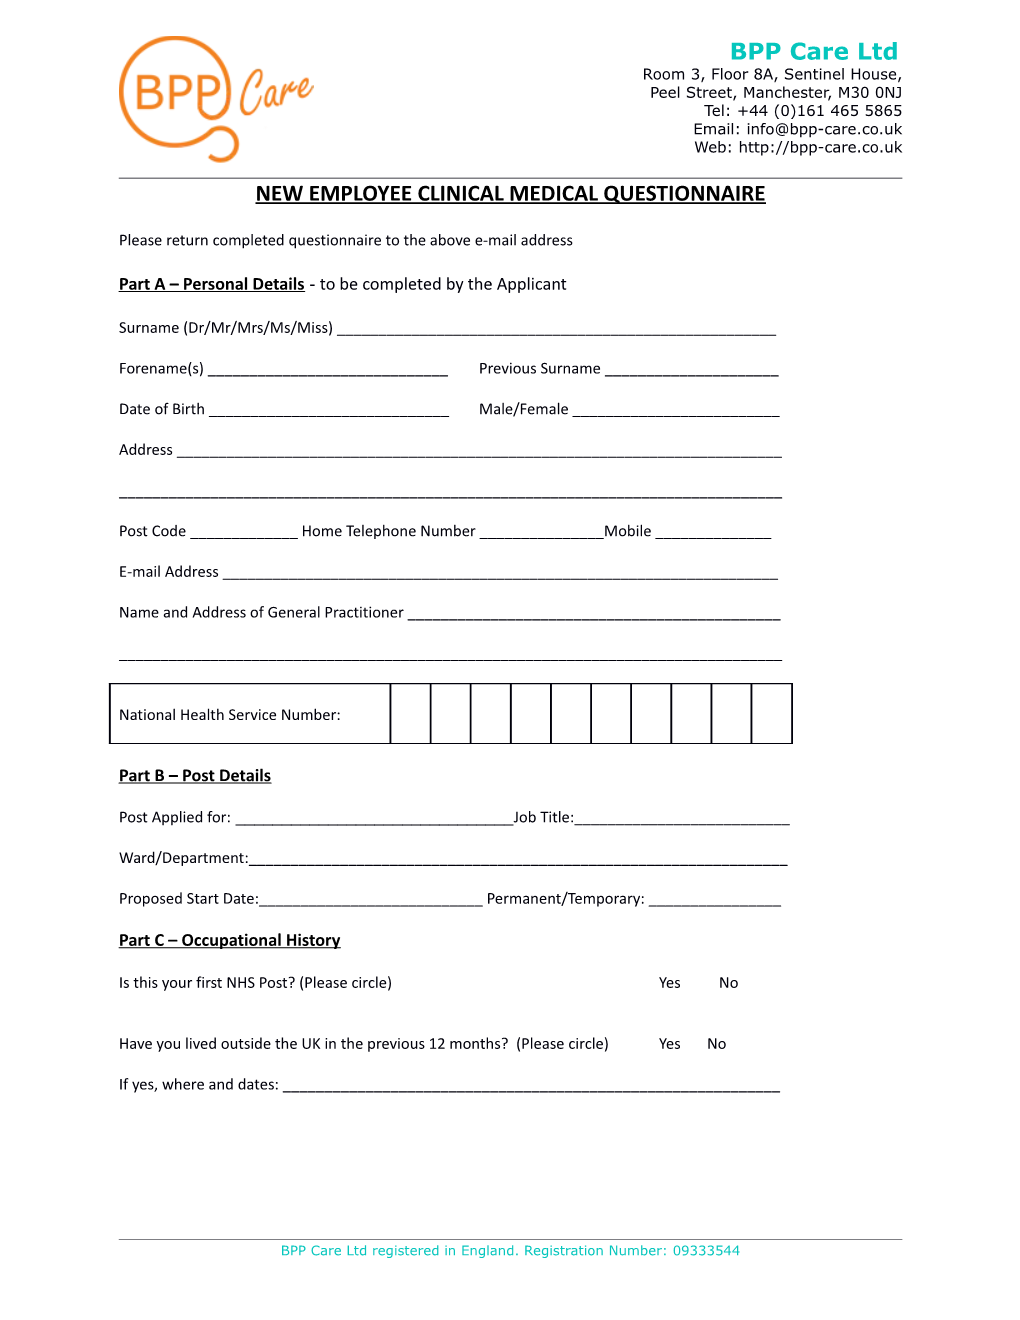 New Employee Clinical Medical Questionnaire